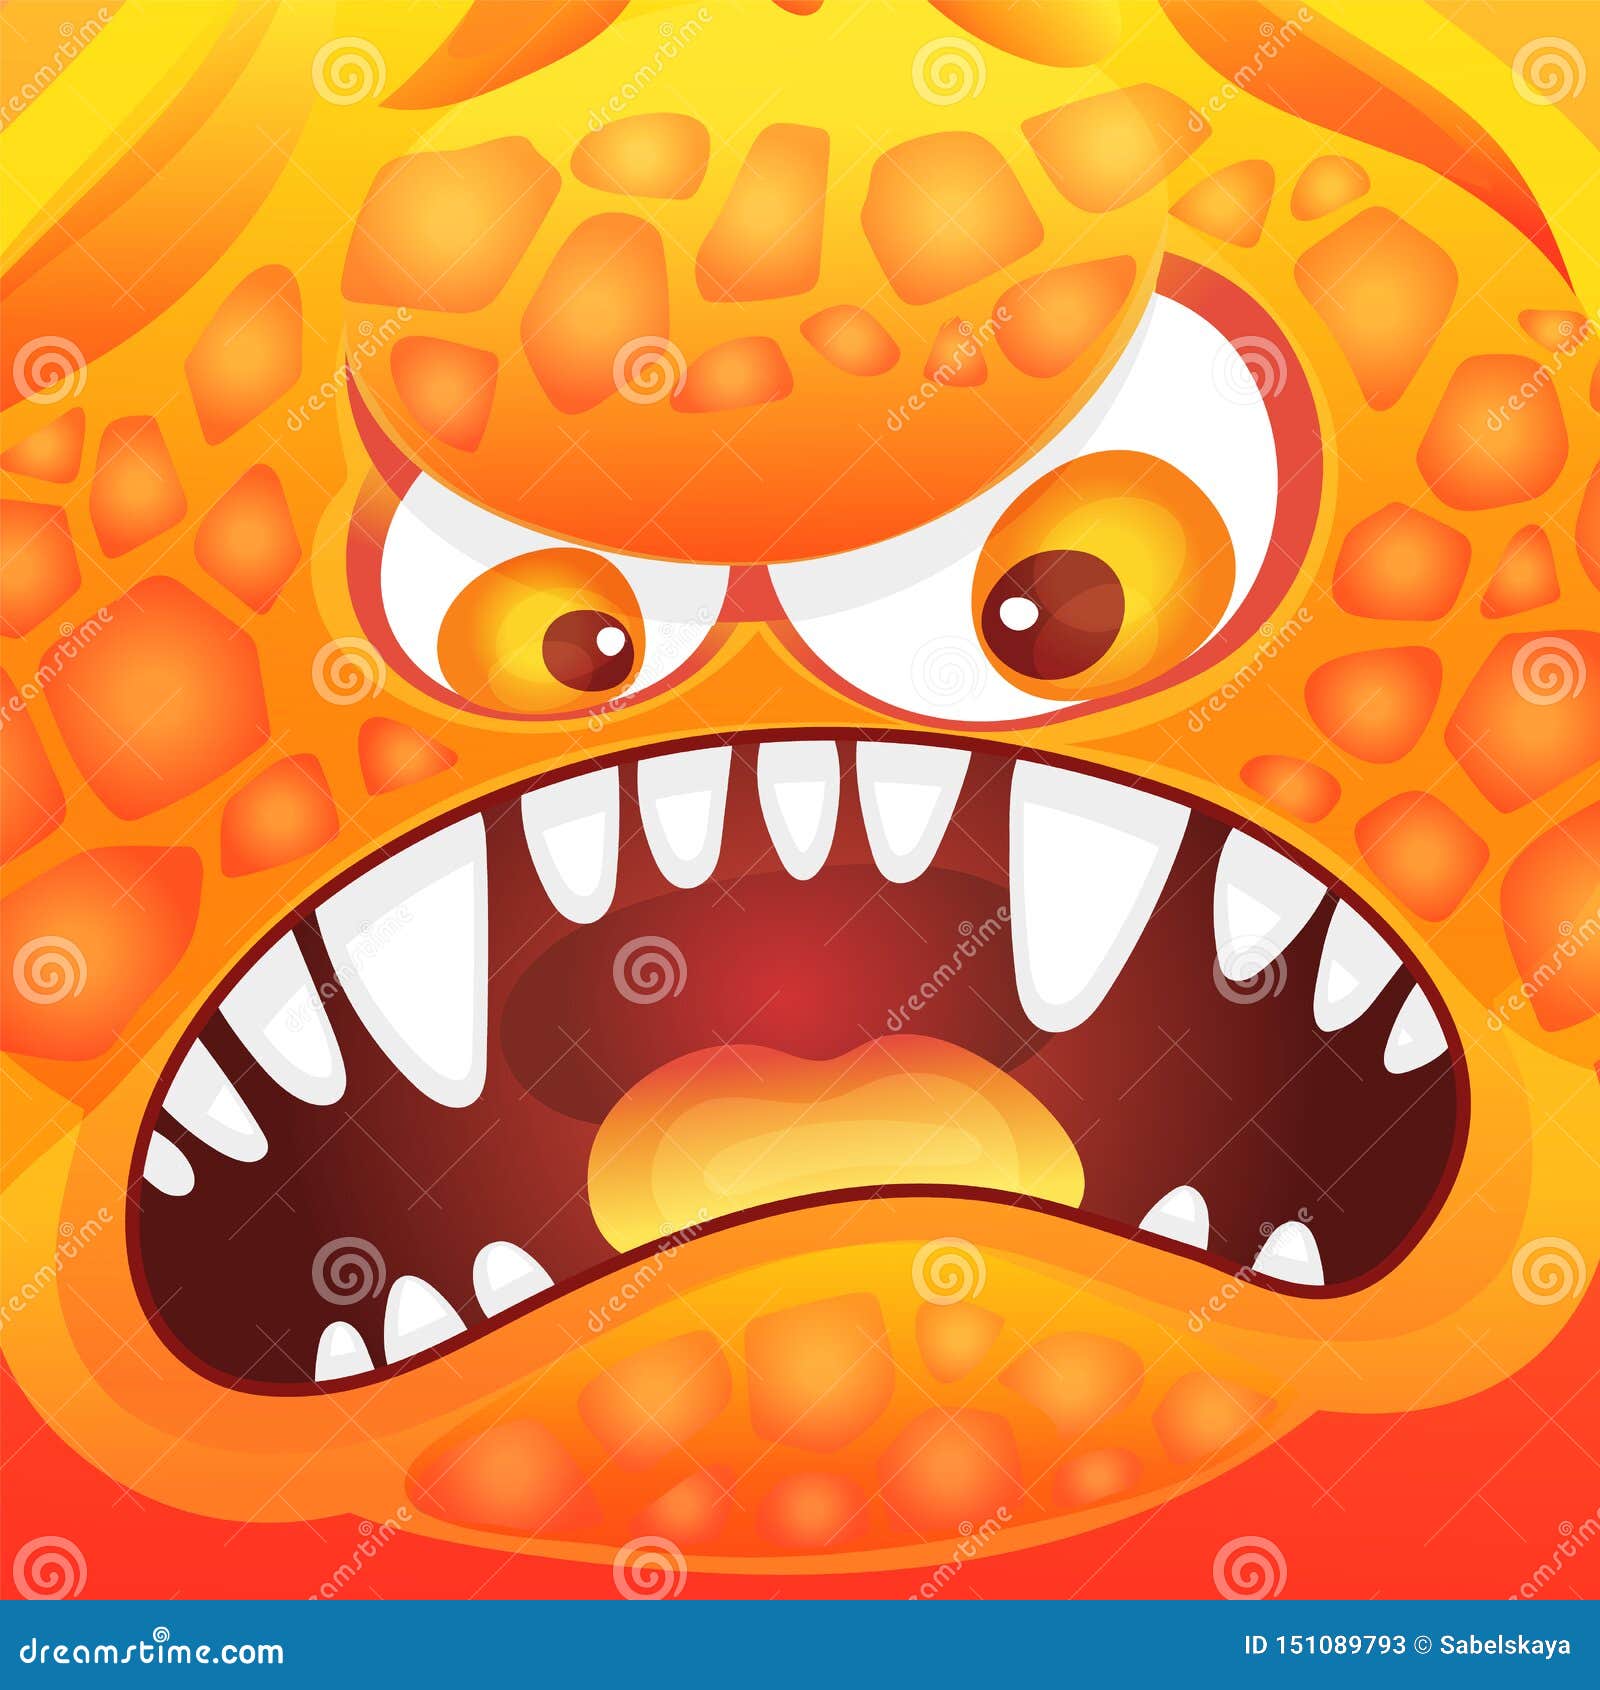 Funny Cartoon Alien or Monster`s Angry and Scary Emotion the Vector  Illustration. Stock Vector - Illustration of computer, funny: 151089793